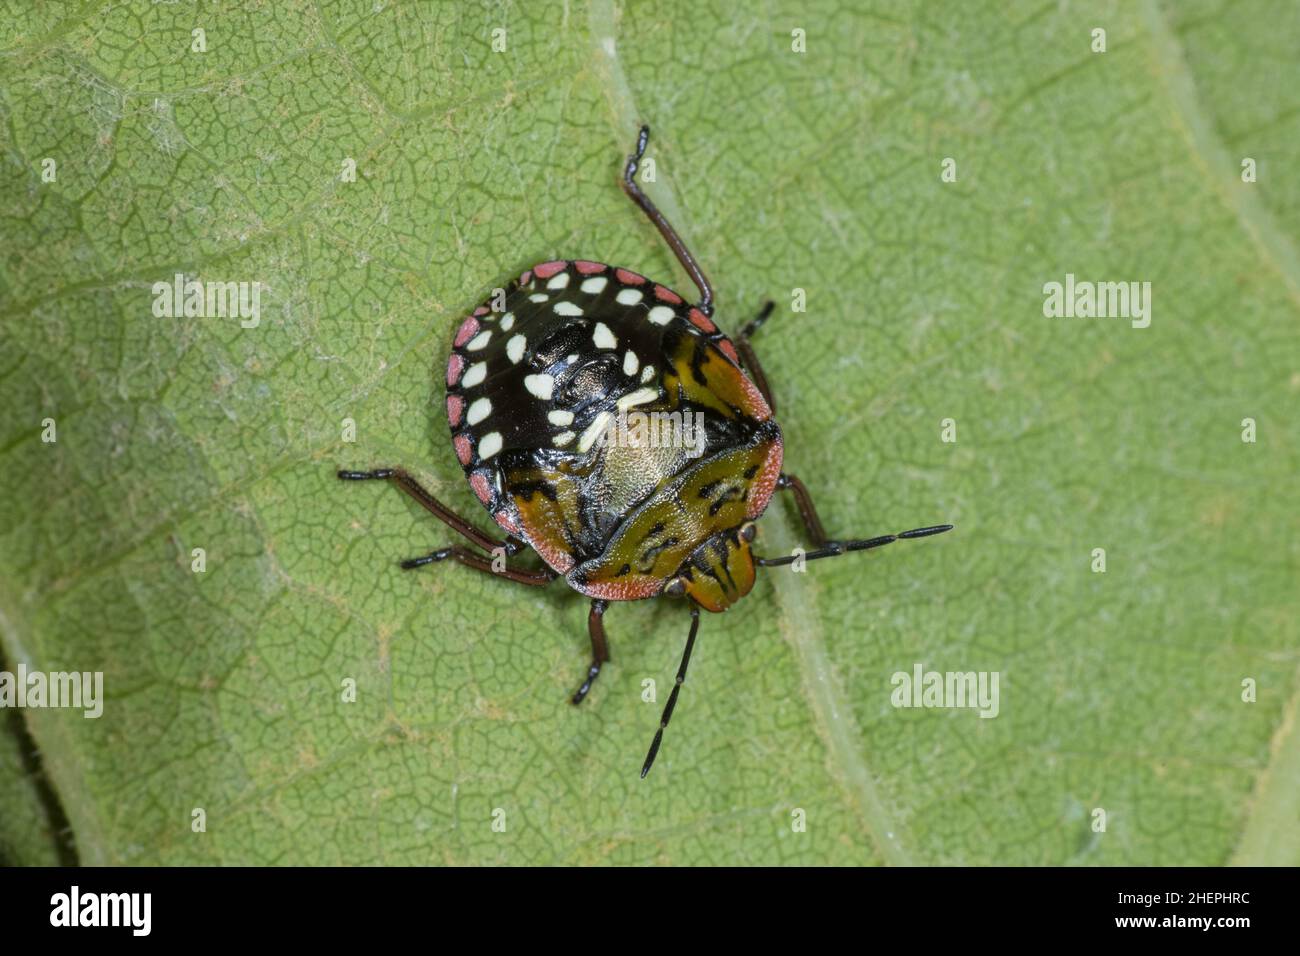 Southern green stink bug, Southern green shield bug, Green vegetable bug  (Nezara viridula), nymph sitting on a leaf, view from above, Germany Stock Photo